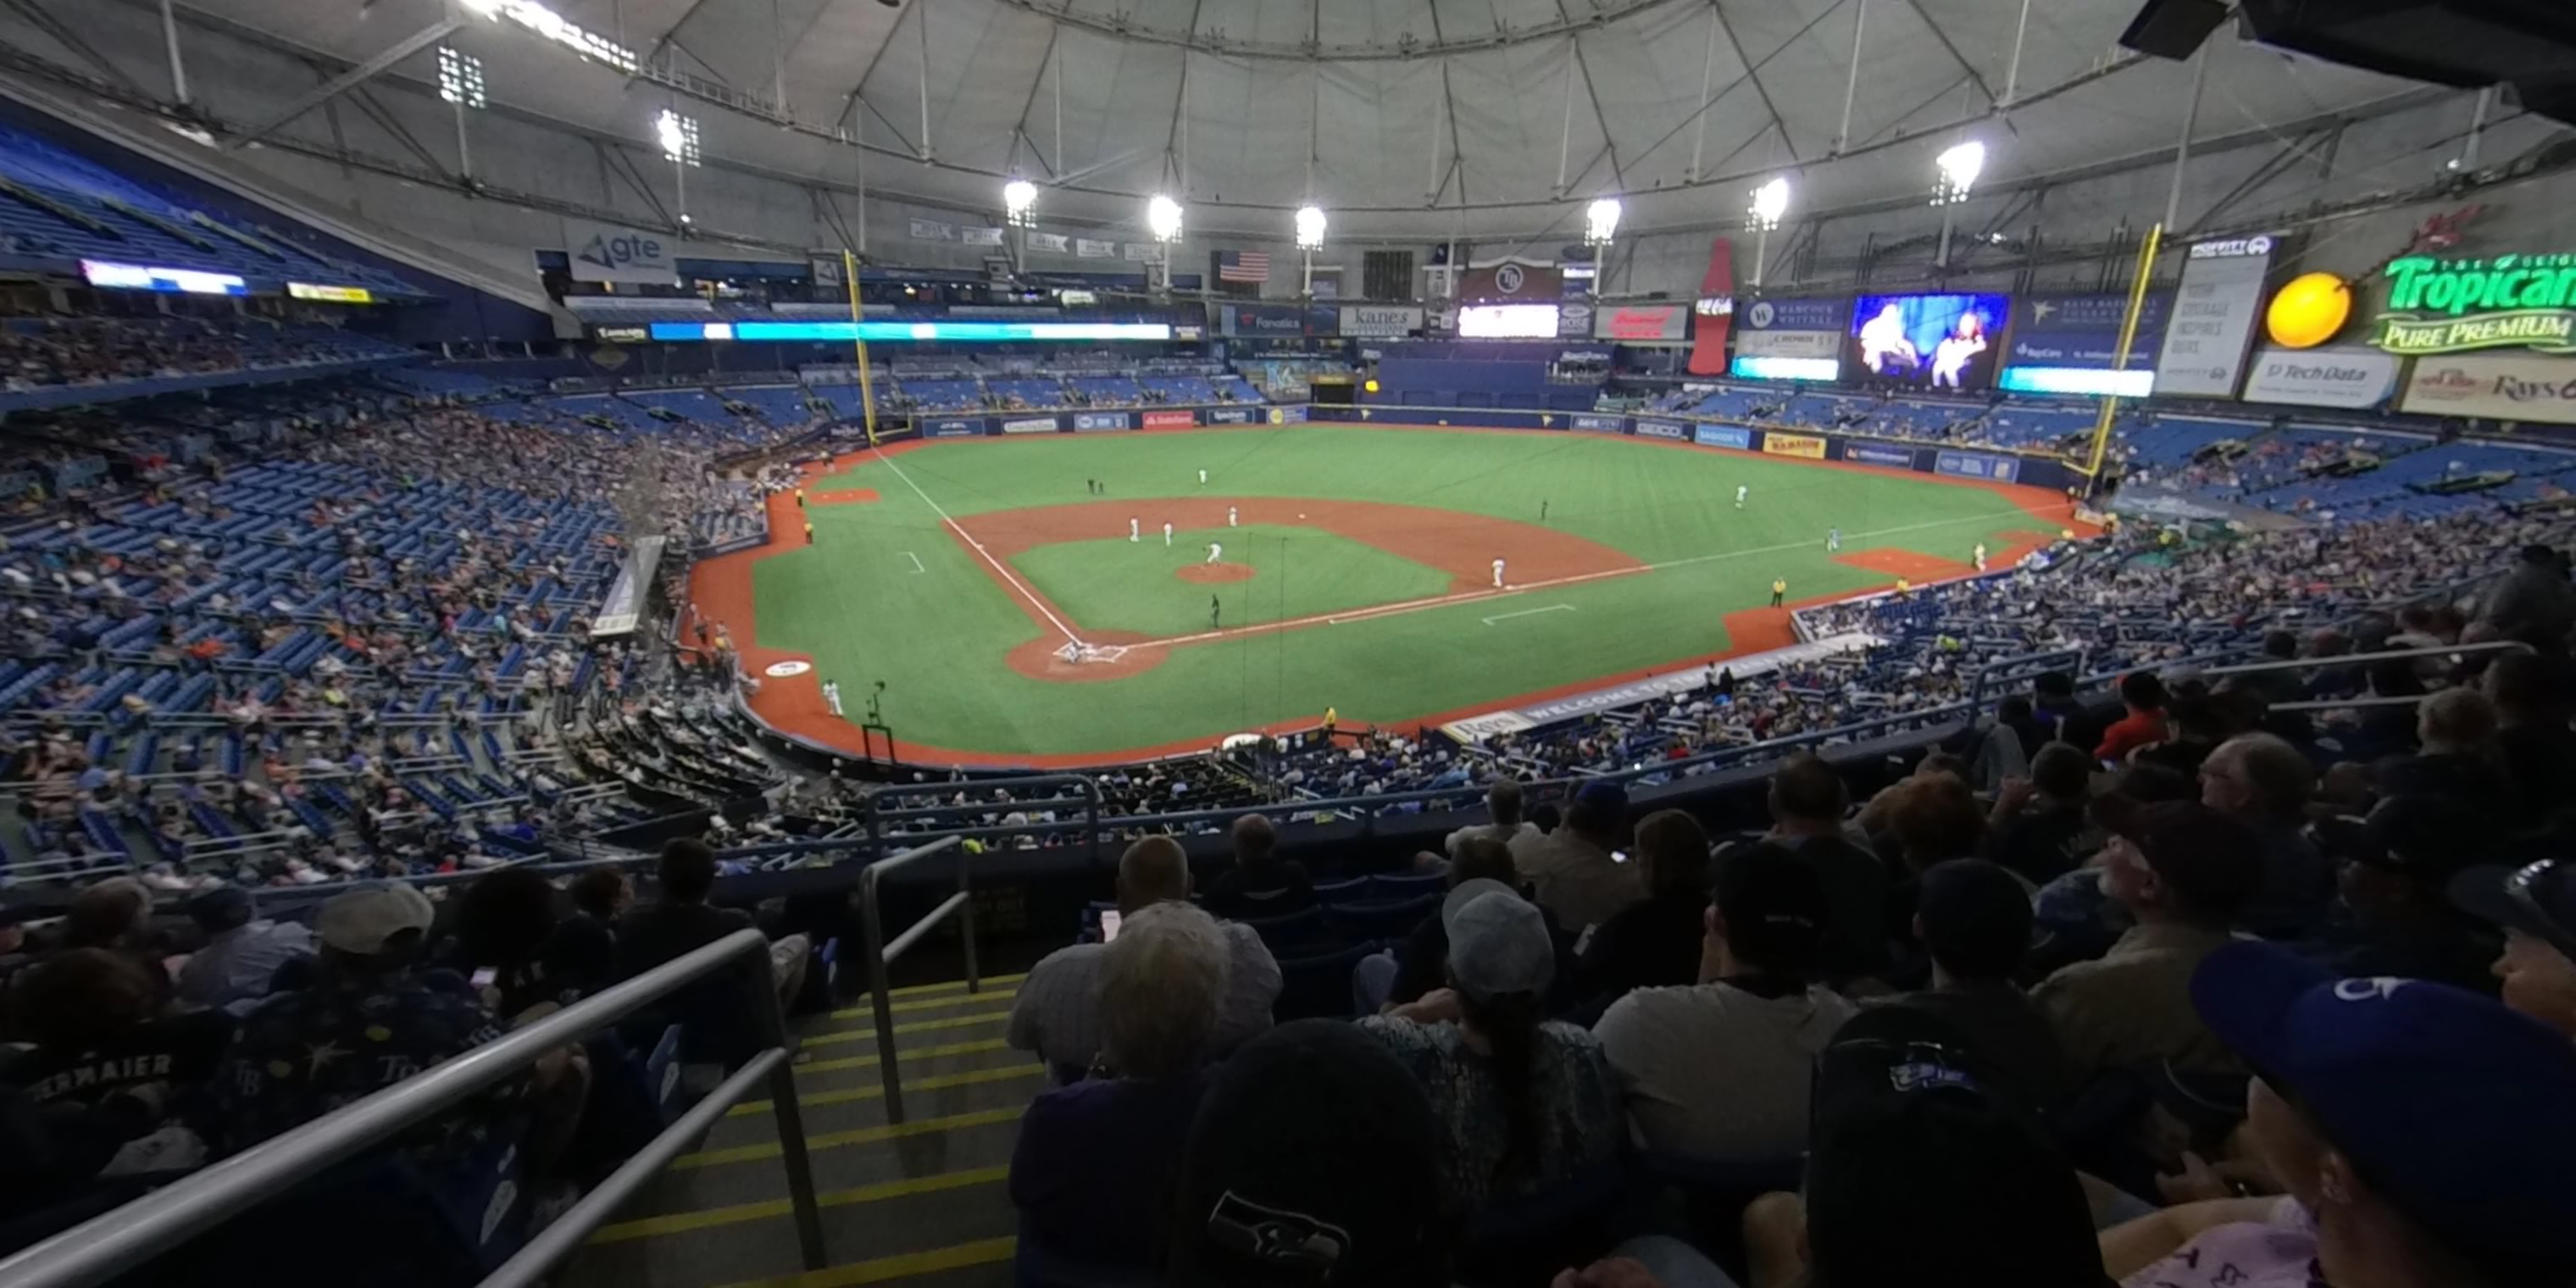 section 206 panoramic seat view  for baseball - tropicana field